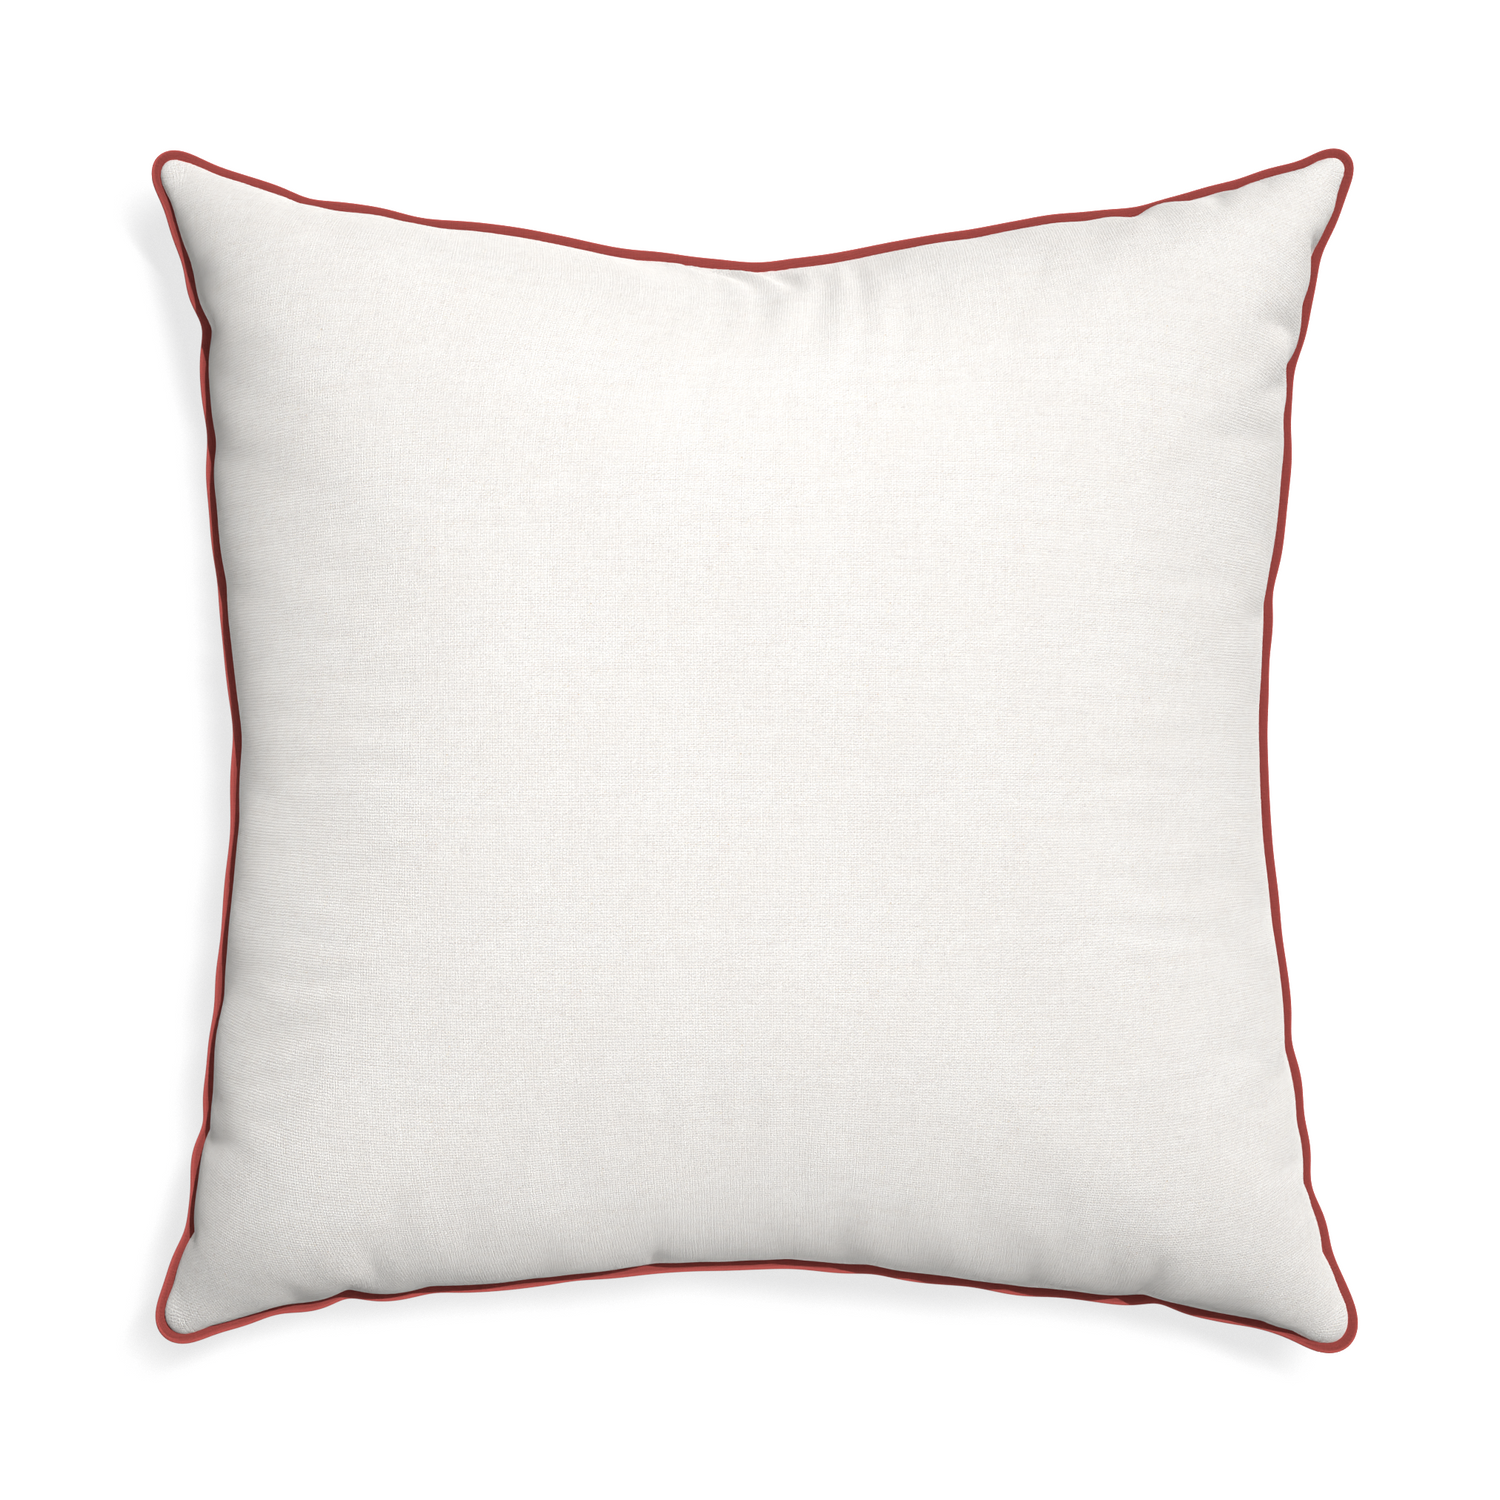 Euro-sham flour custom pillow with c piping on white background